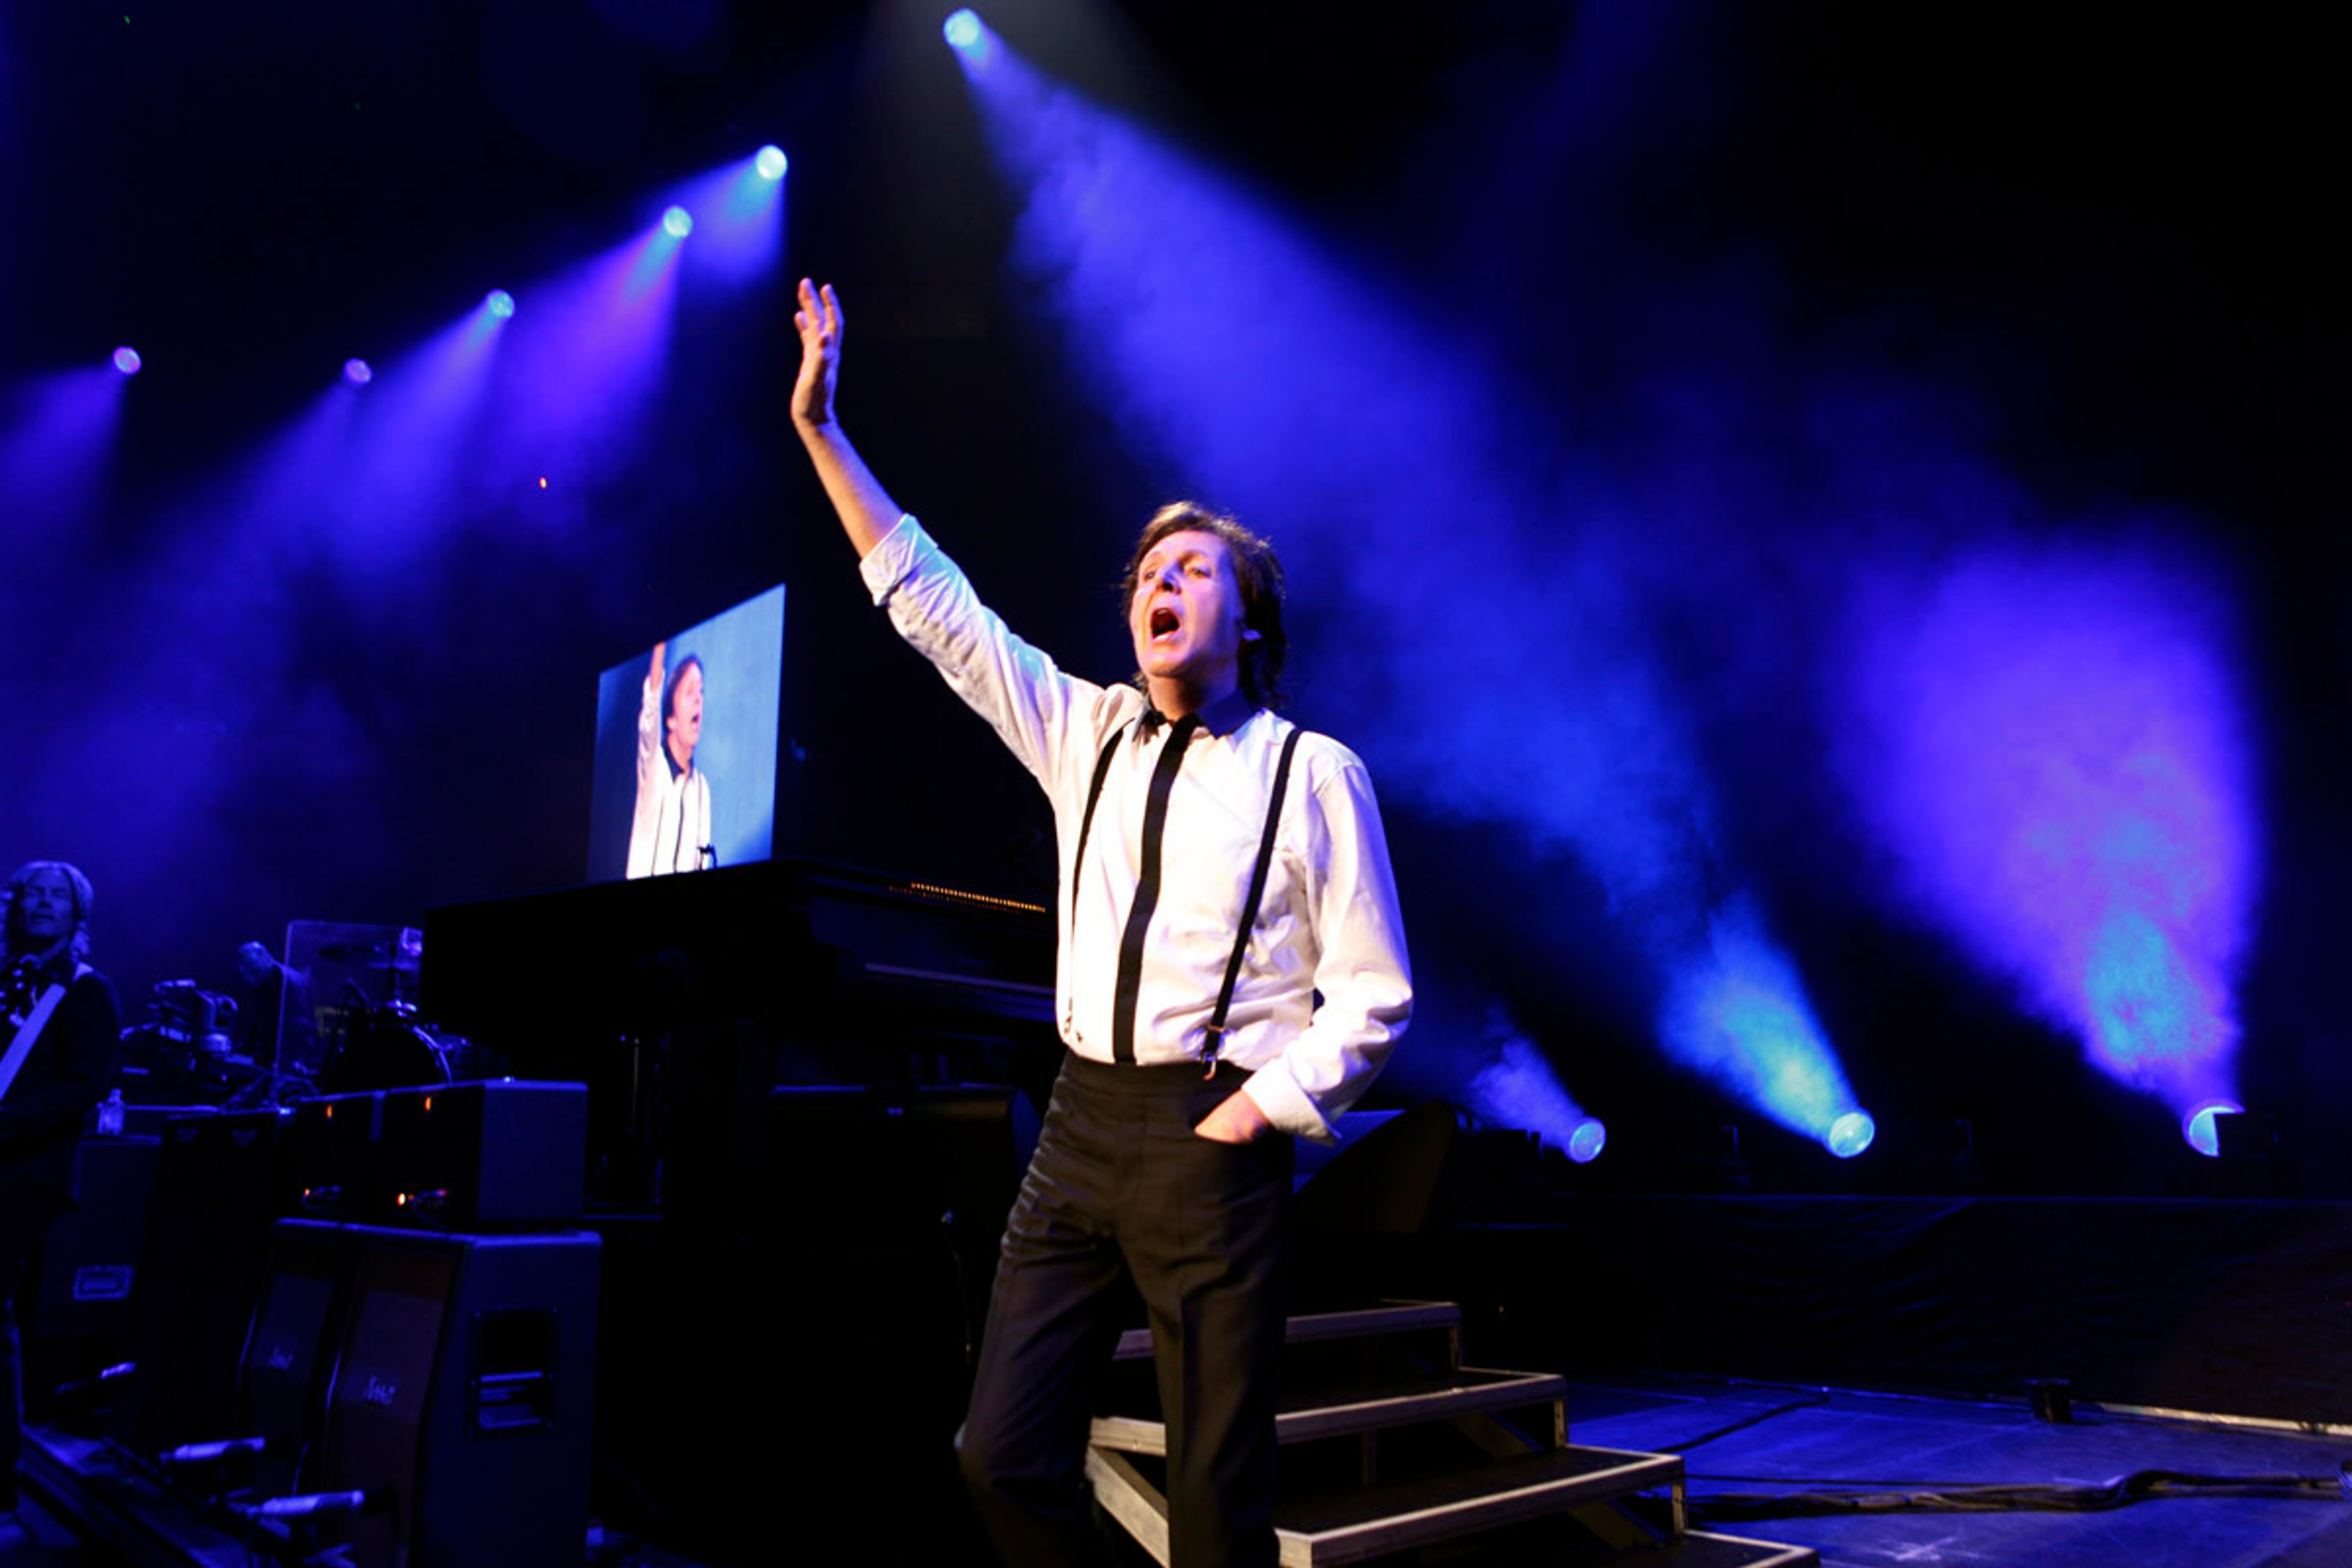 Paul waving to the crowd, Scottrade Center, St Louis, 11th November 2012